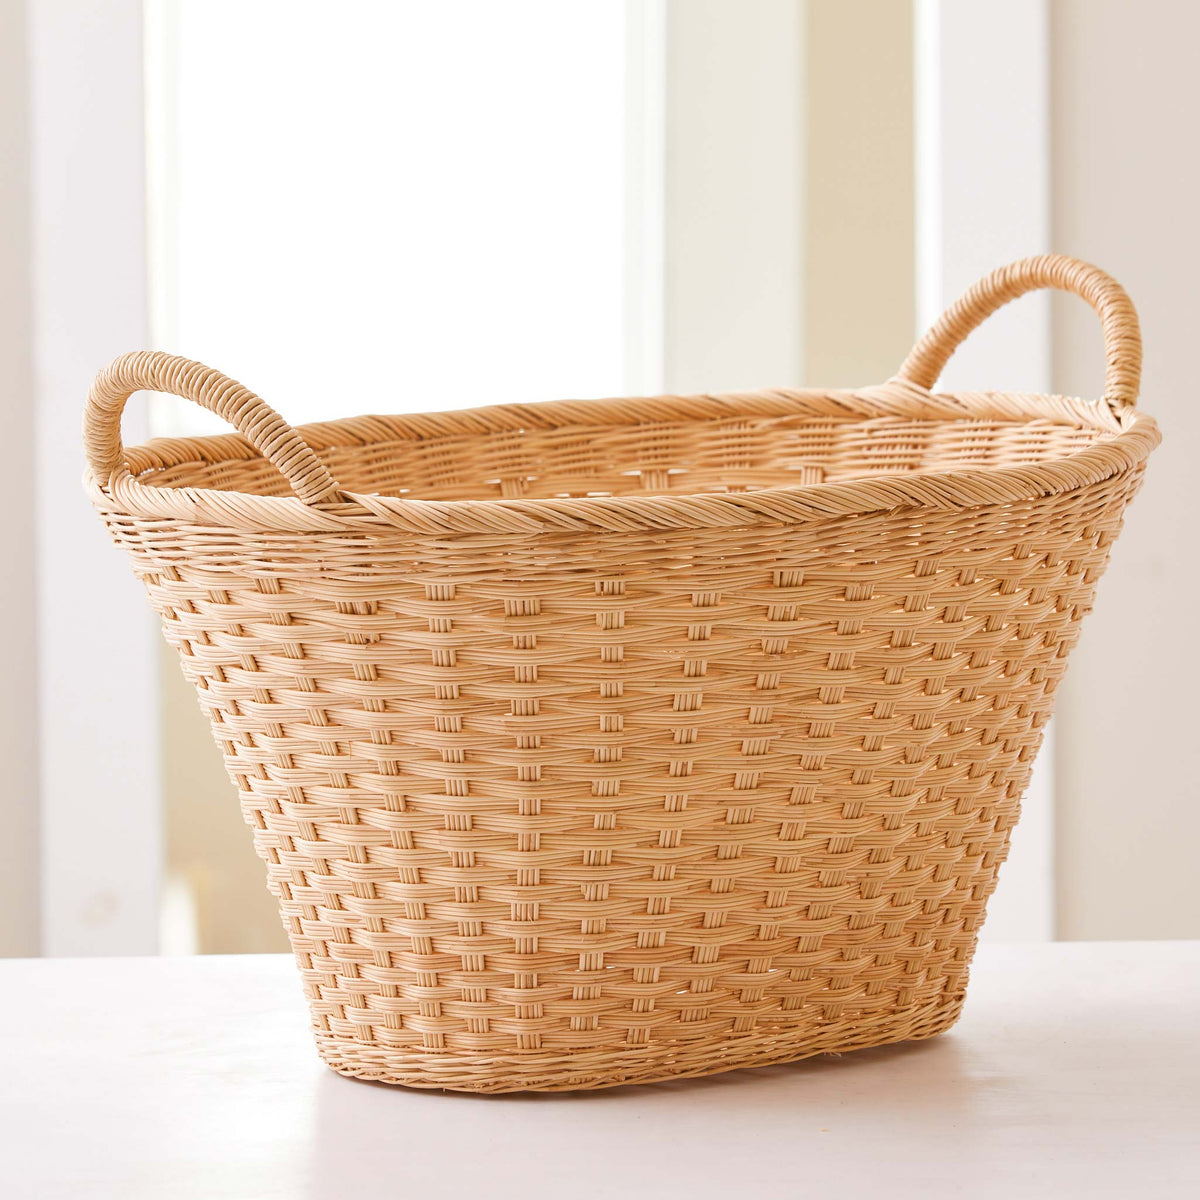 Beautiful Laundry basket. Traditional Laundry basket shape and handles. Tall, tough and durable laundry basket that is handmade and natural. 